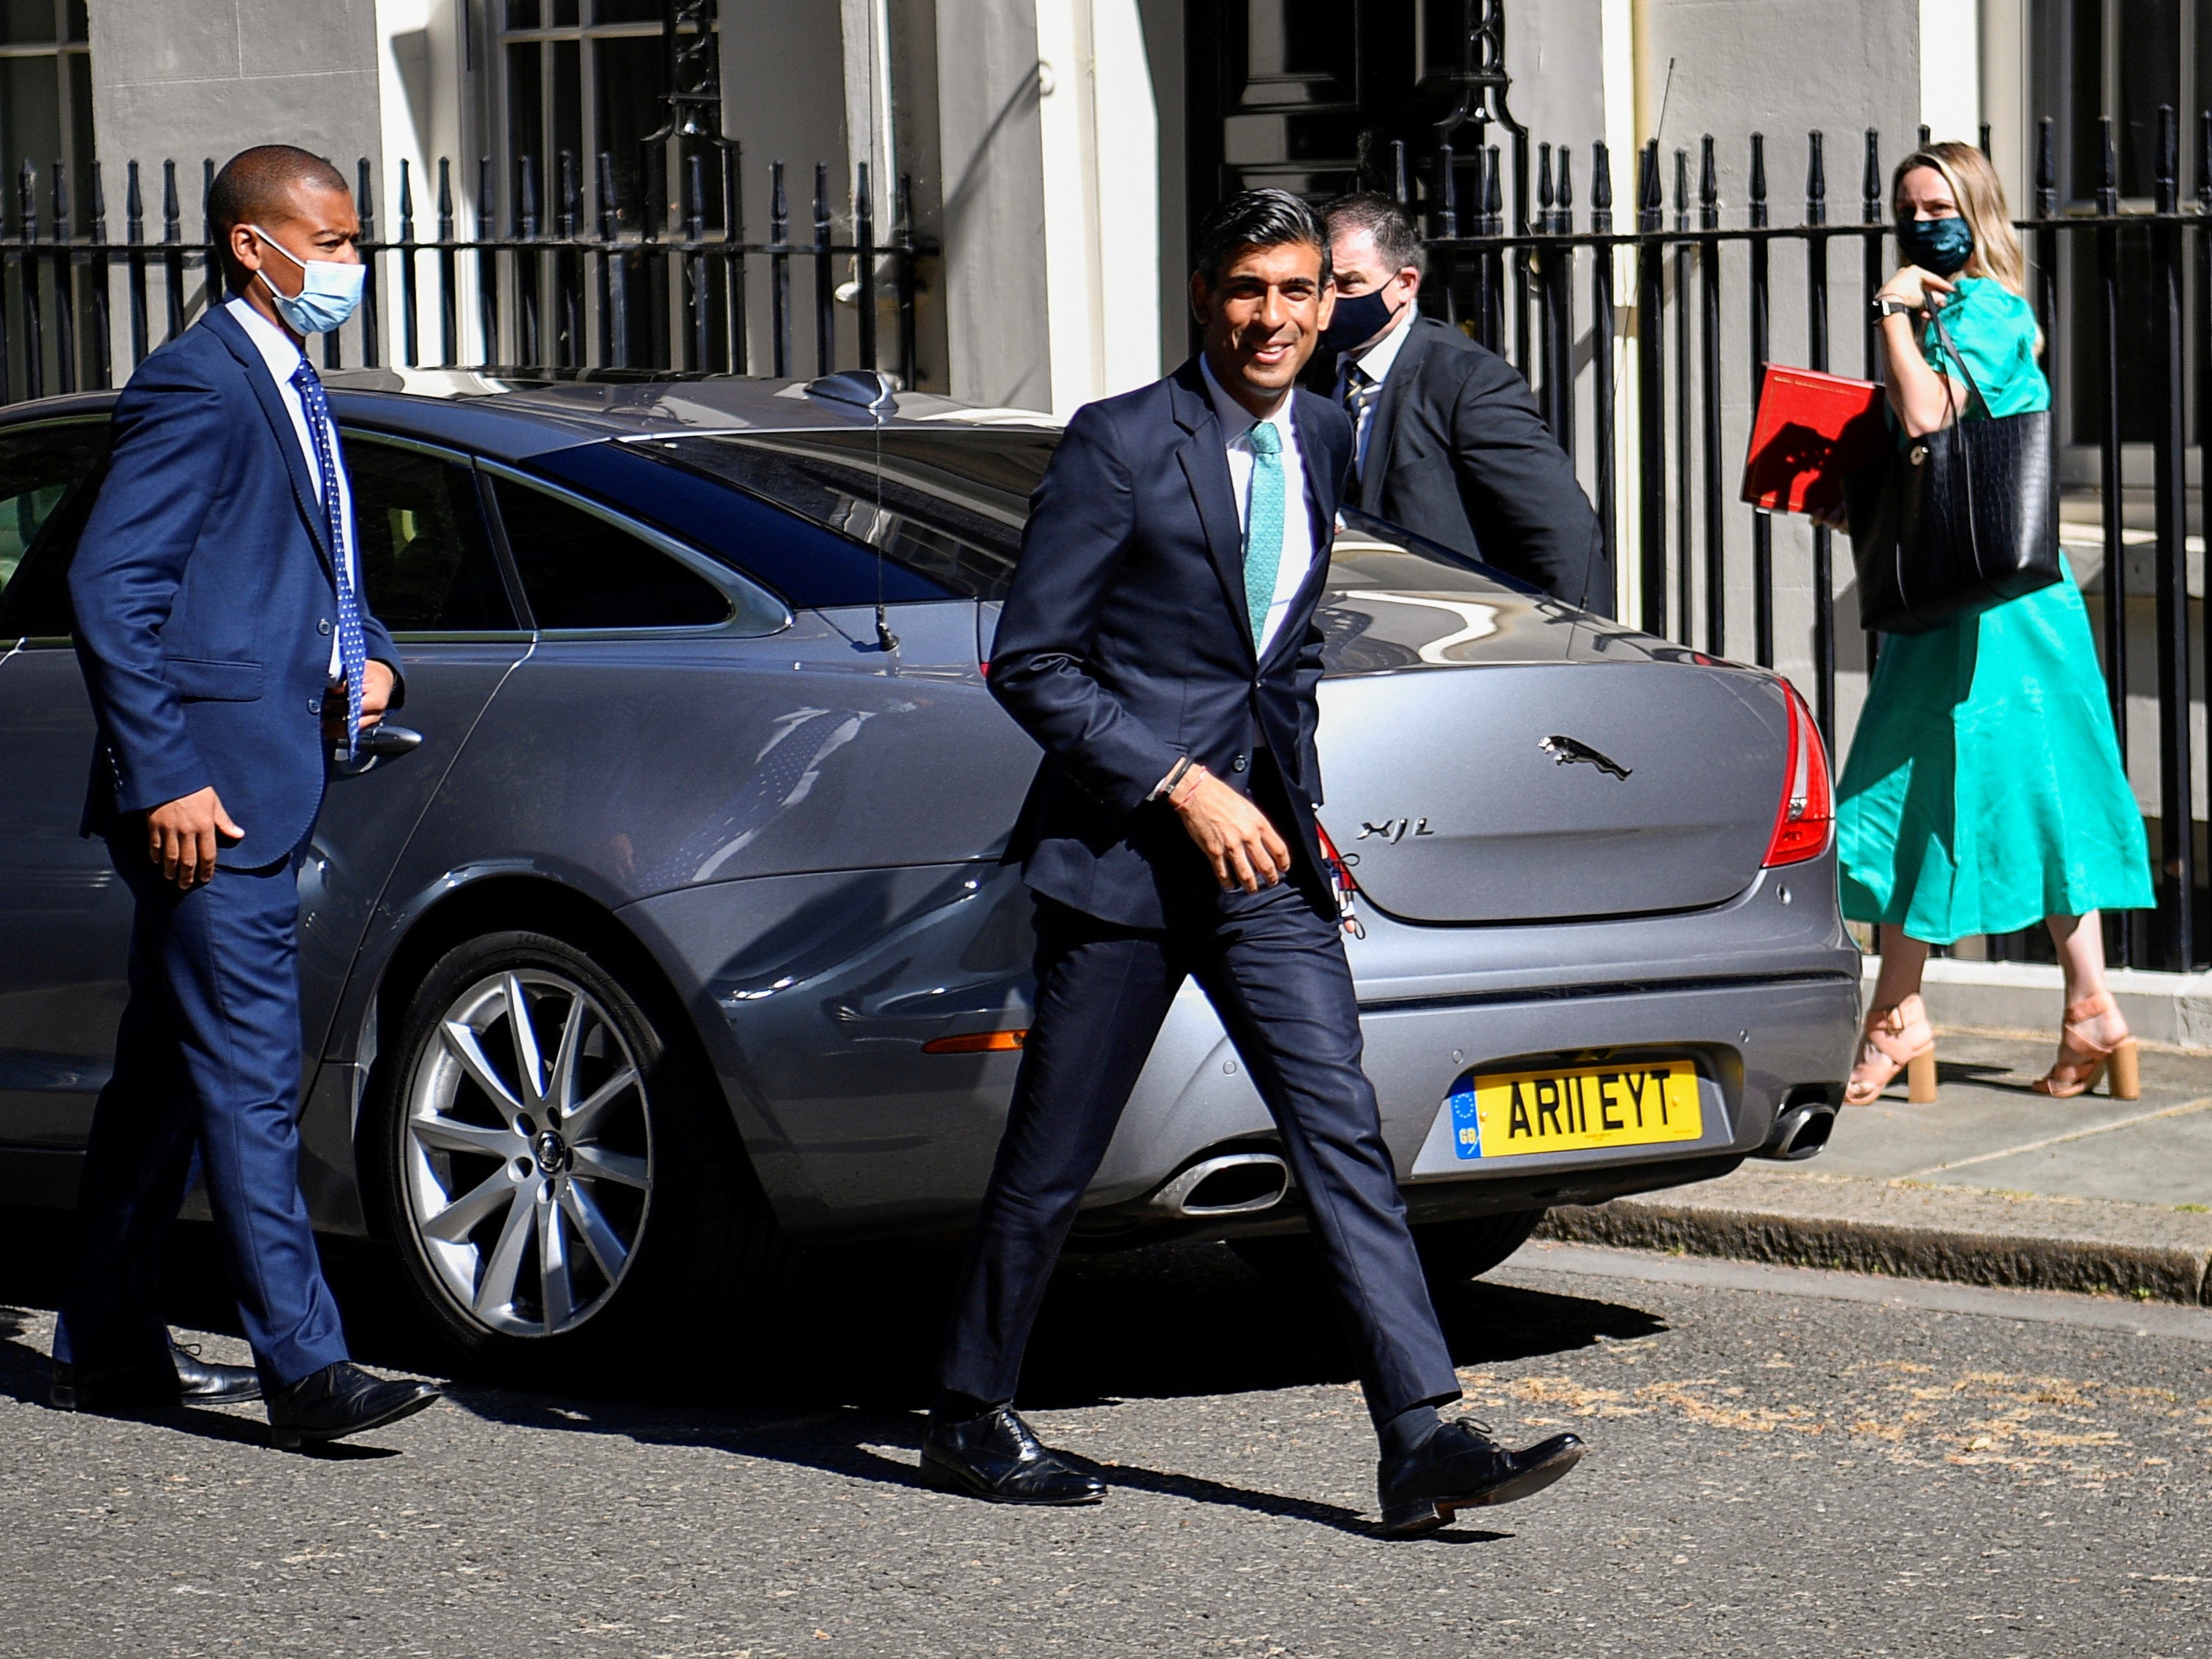 Rishi Sunak, the chancellor, headed to the north of England today